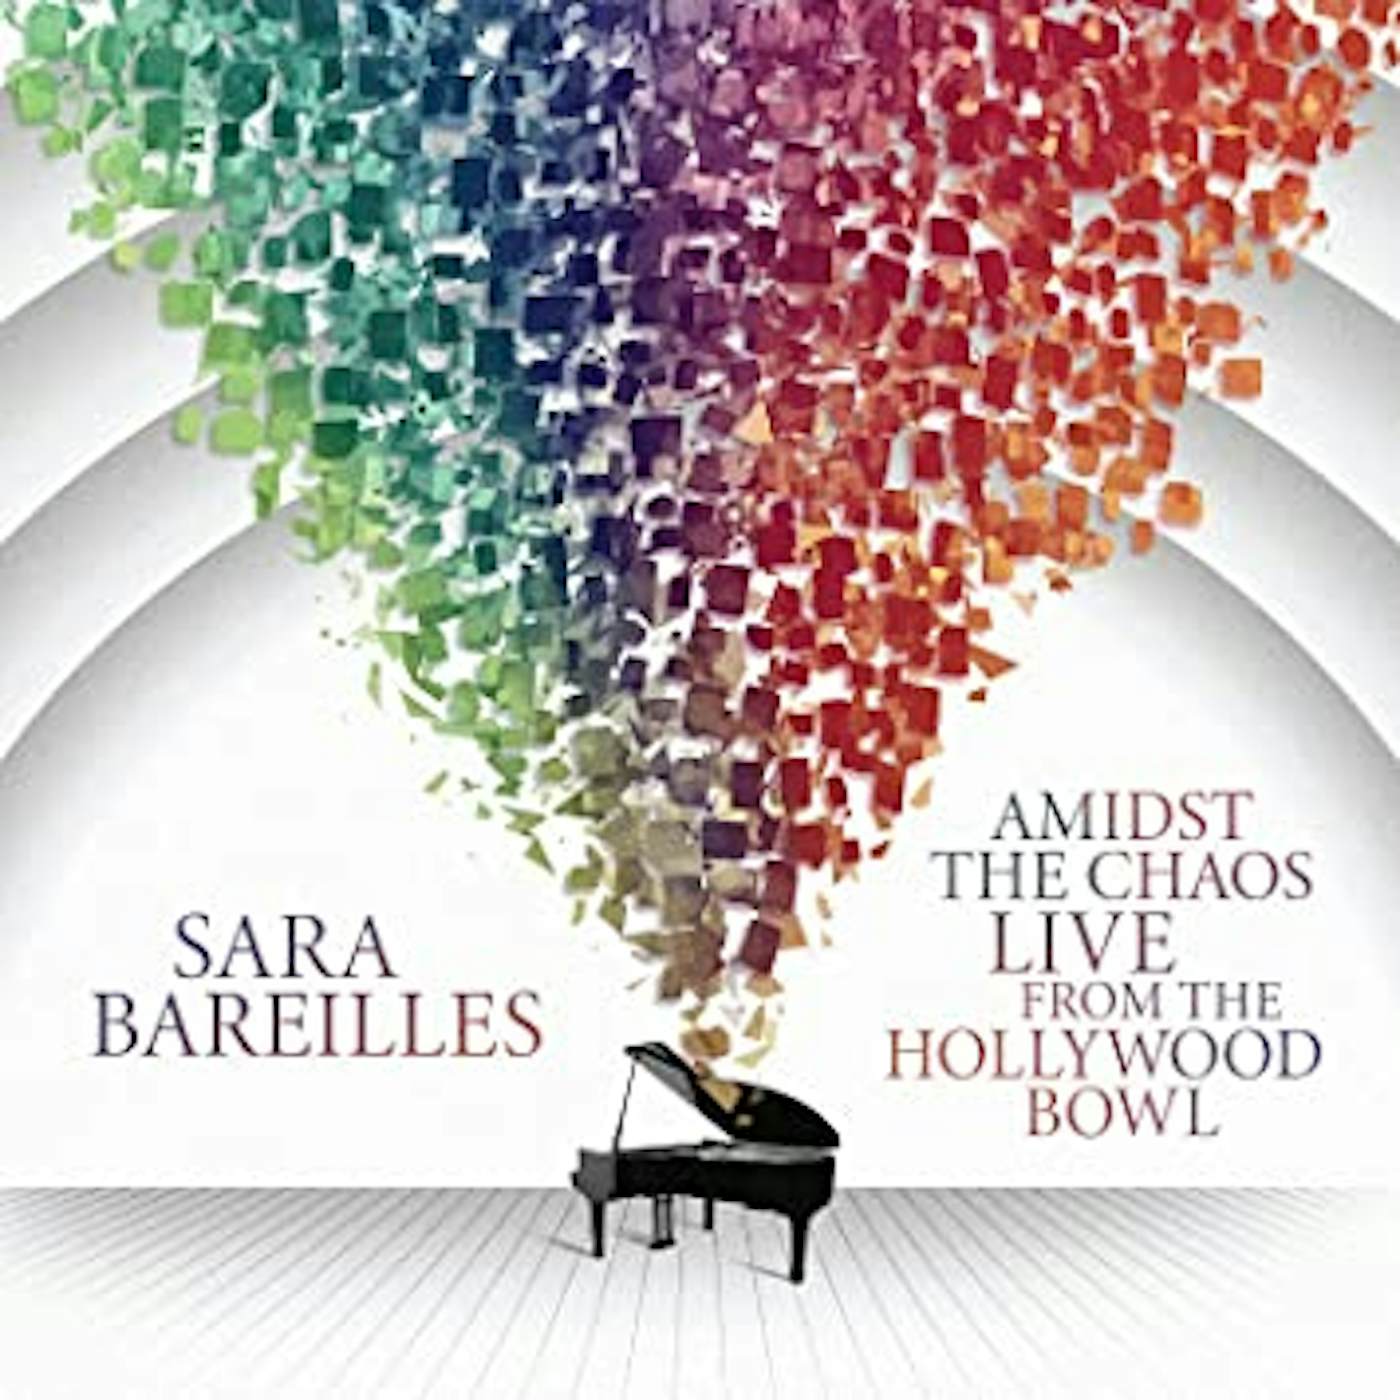 Sara Bareilles Amidst the Chaos: Live from the Hollywood Bowl Vinyl Record